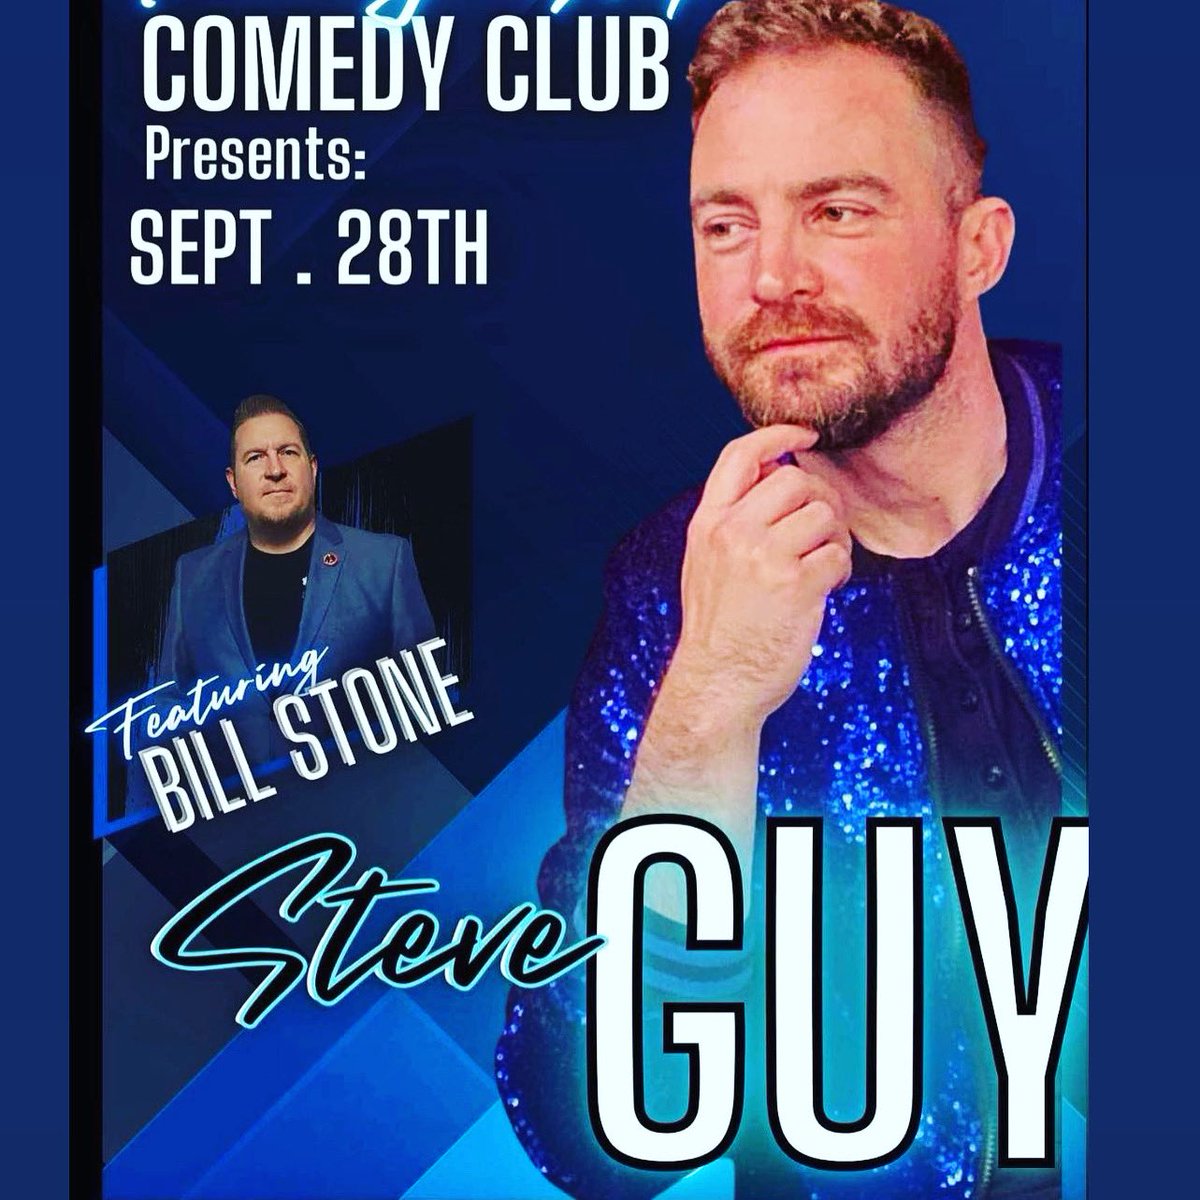 Mark Ricadonna at Funny Stop this weekend Friday Sep 29th and Saturday Sep.30th Thursday Sep 28th Steve guy Wed. Amateur night For reservation call 3309234700 Or online at funny.online